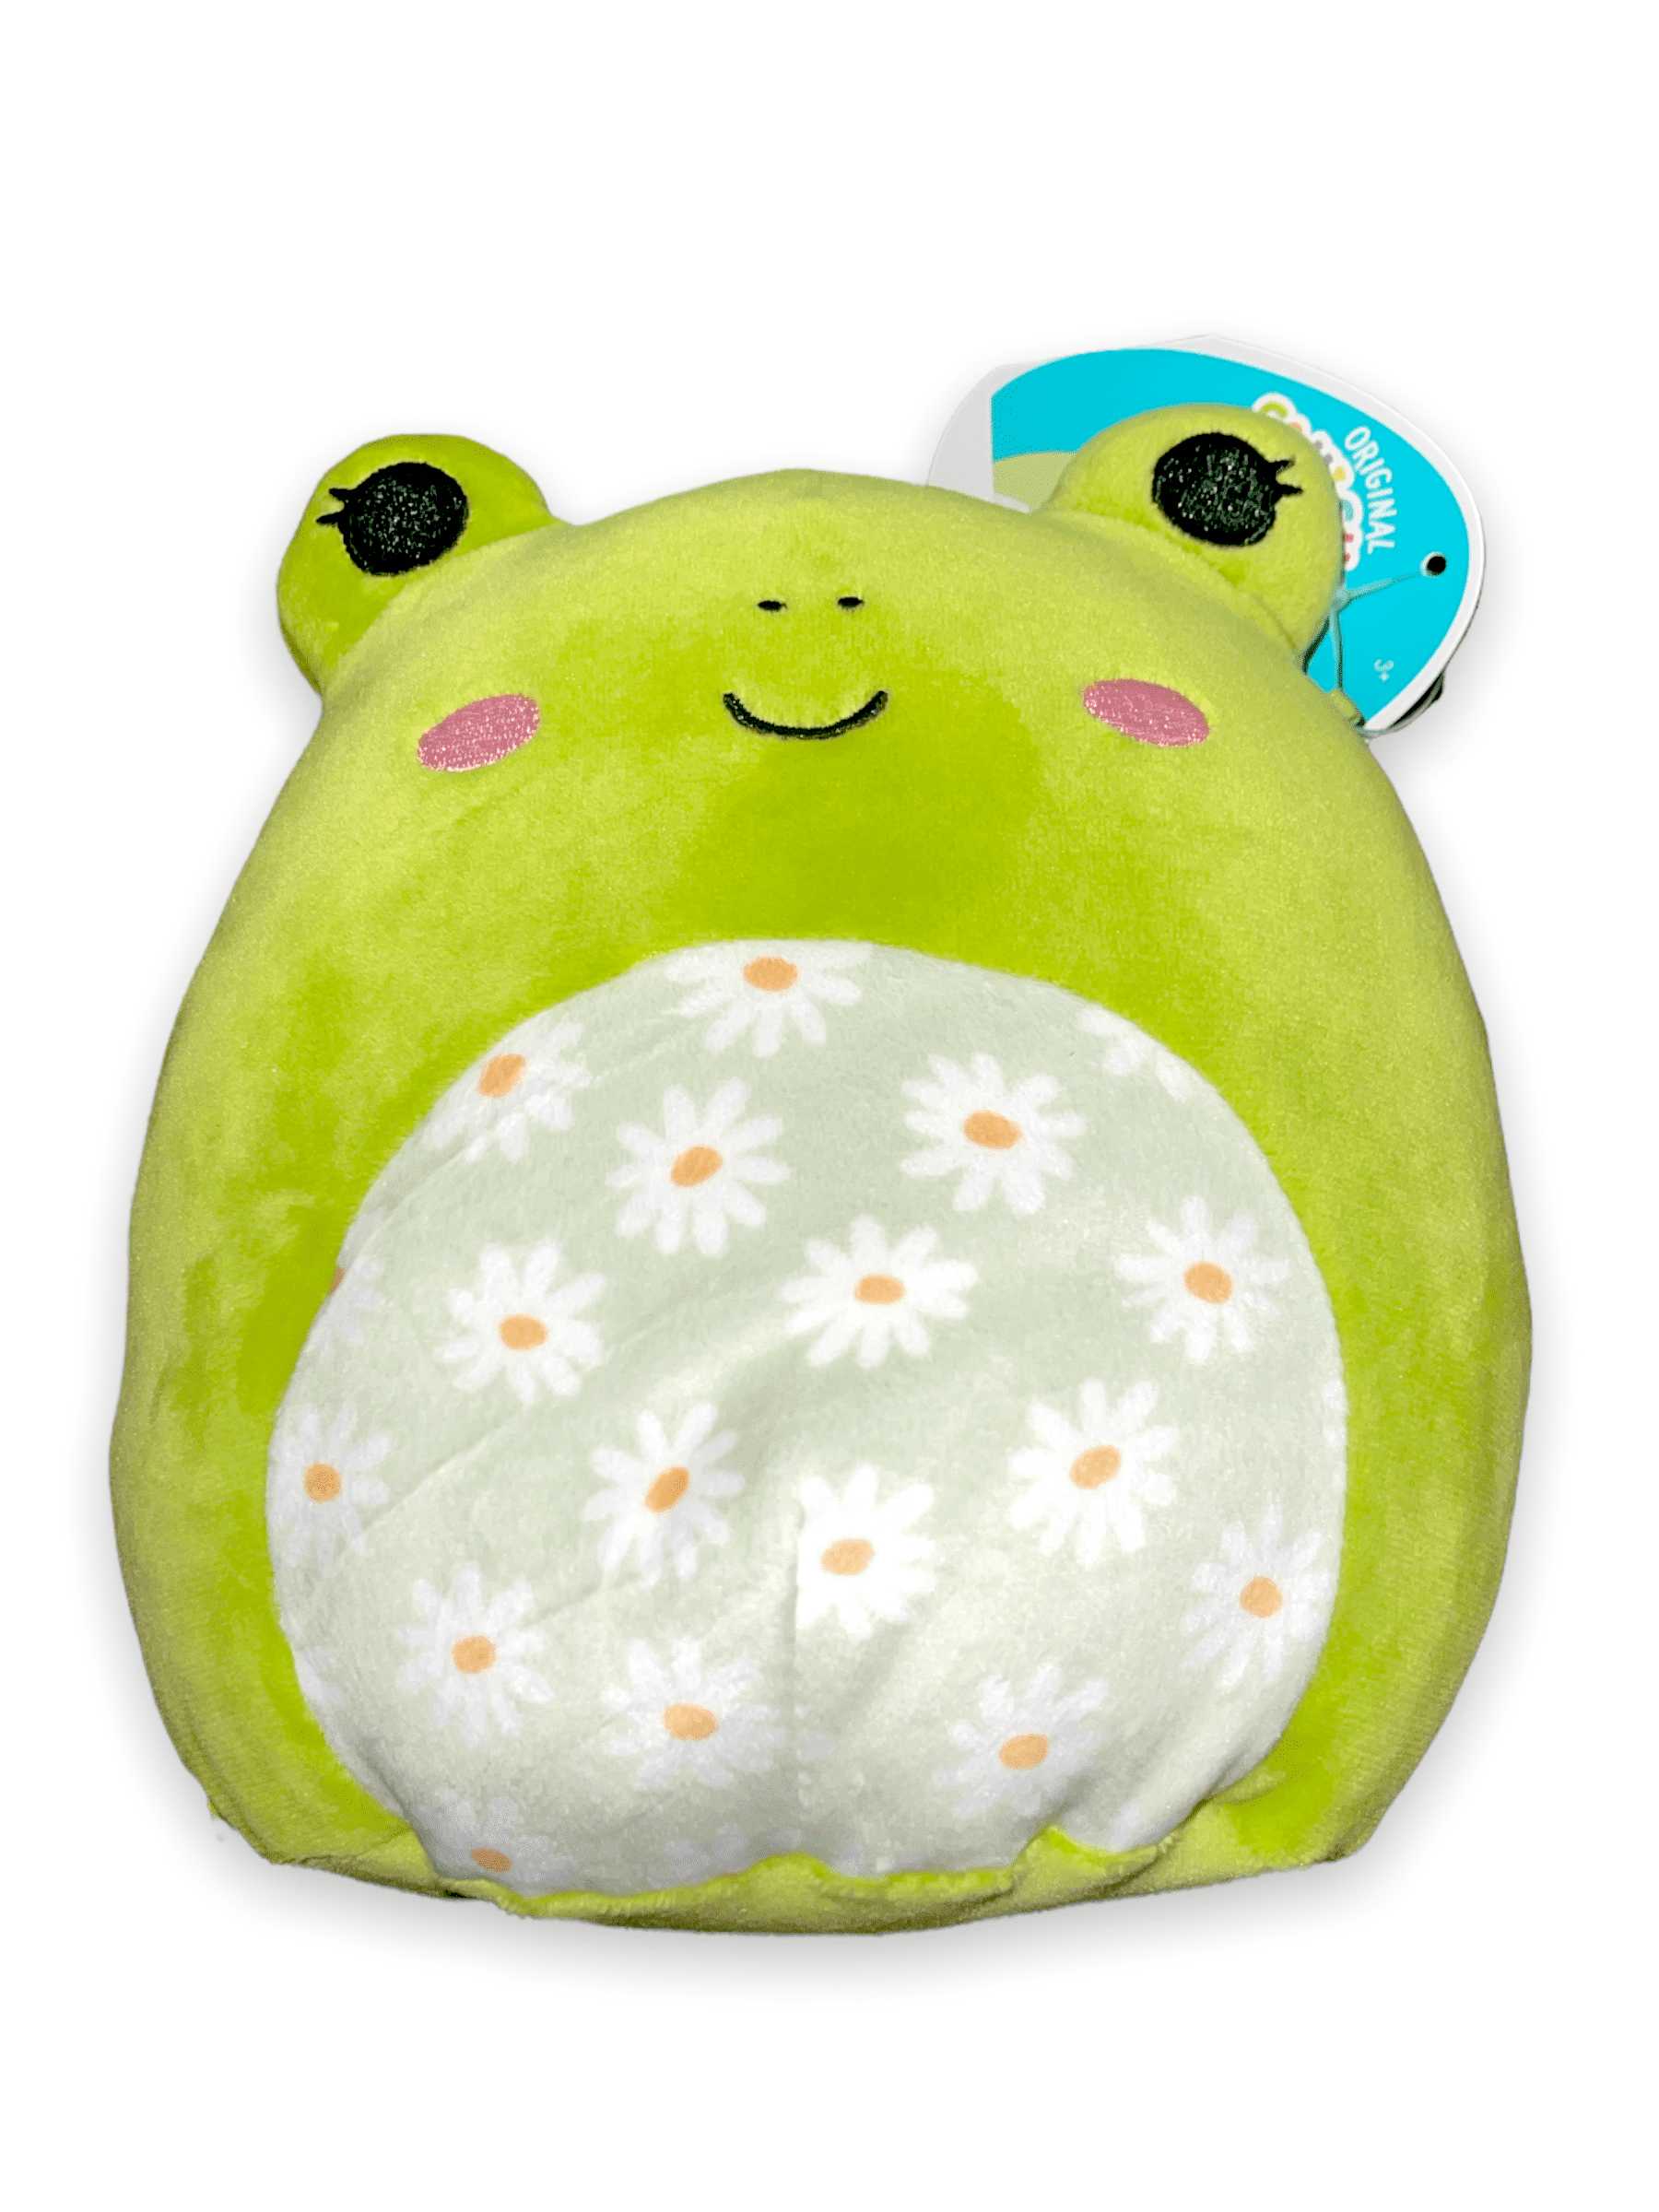 Squishmallows Official Kellytoy Plush 7.5 Inch Squishy Stuffed Toy Animal (Wendy  Frog (Floral Belly)) 